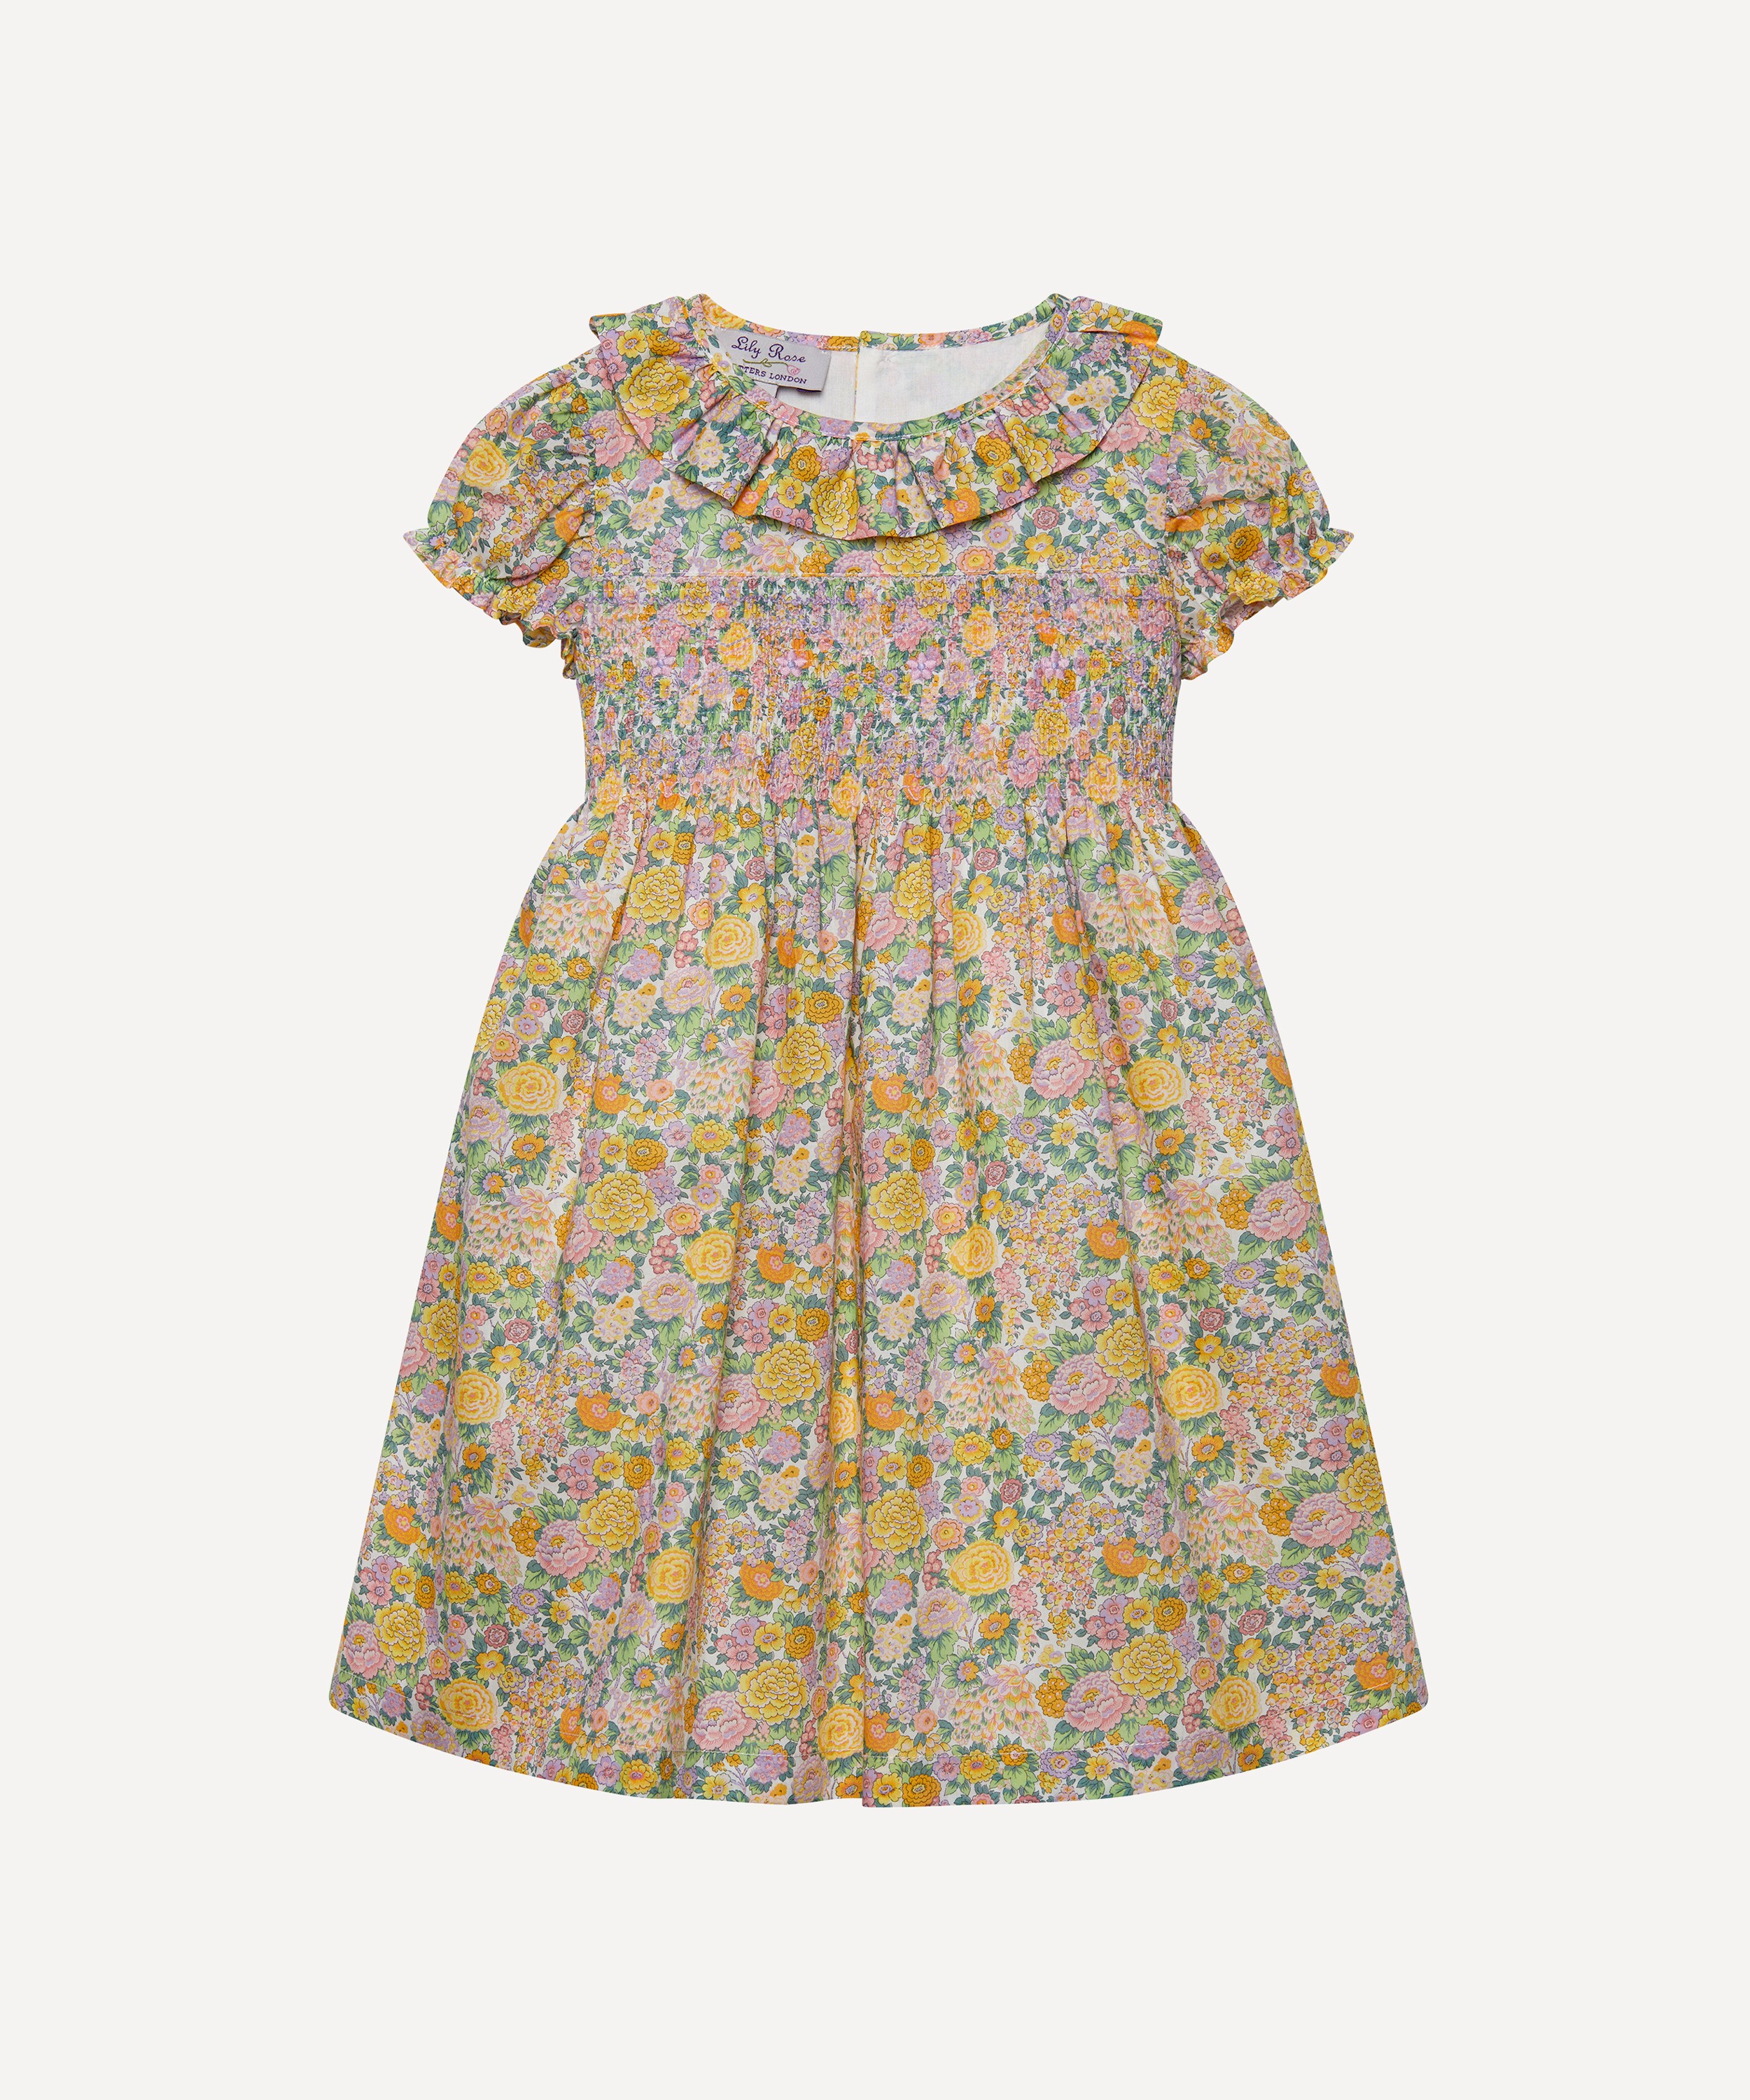 Trotters - Elysian Day Smocked Dress 2-7 Years image number 0